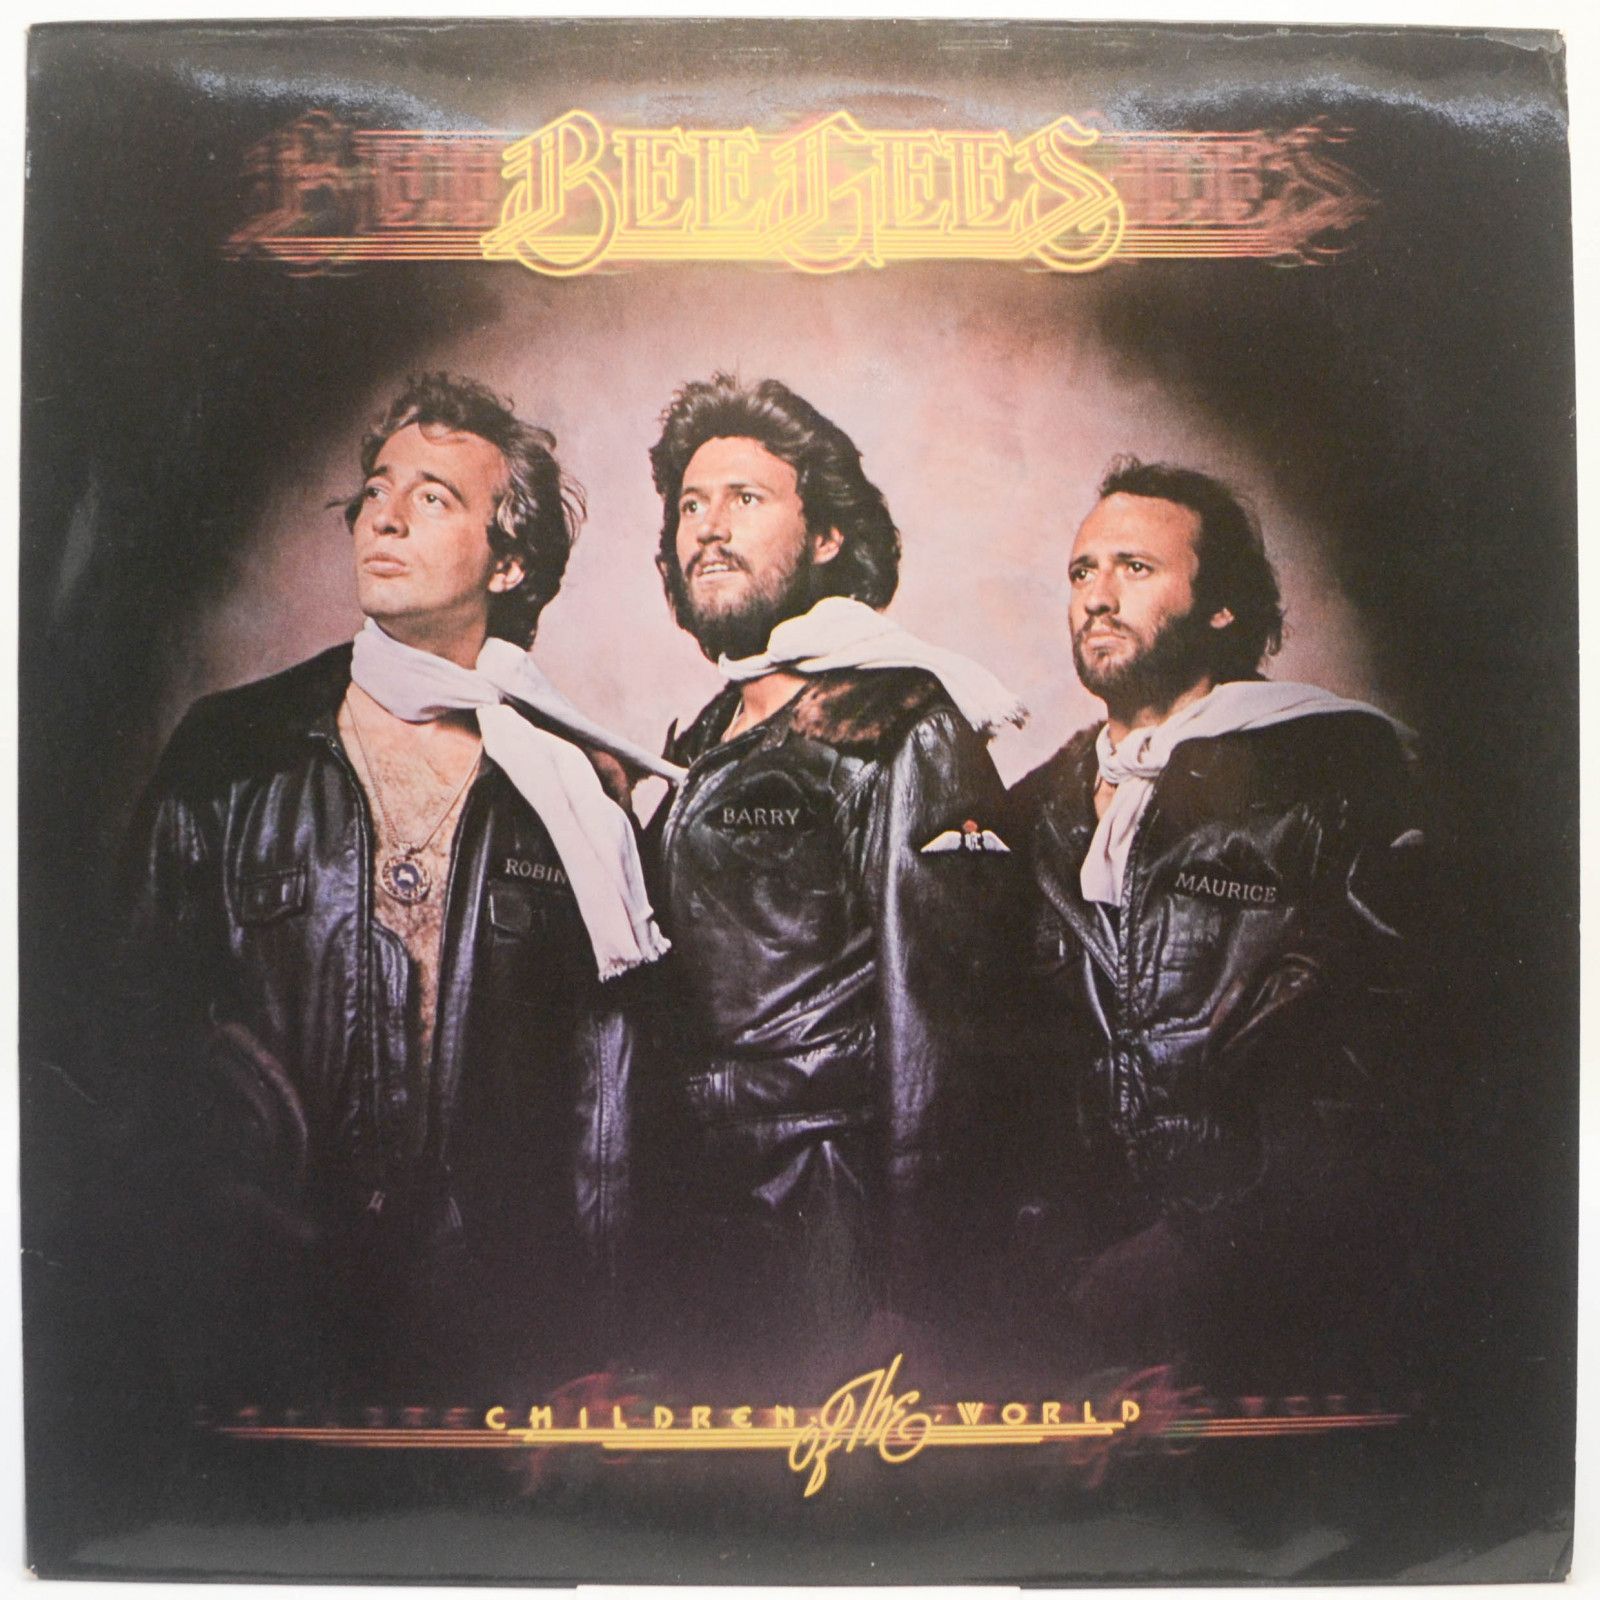 Bee Gees — Children Of The World (UK), 1976